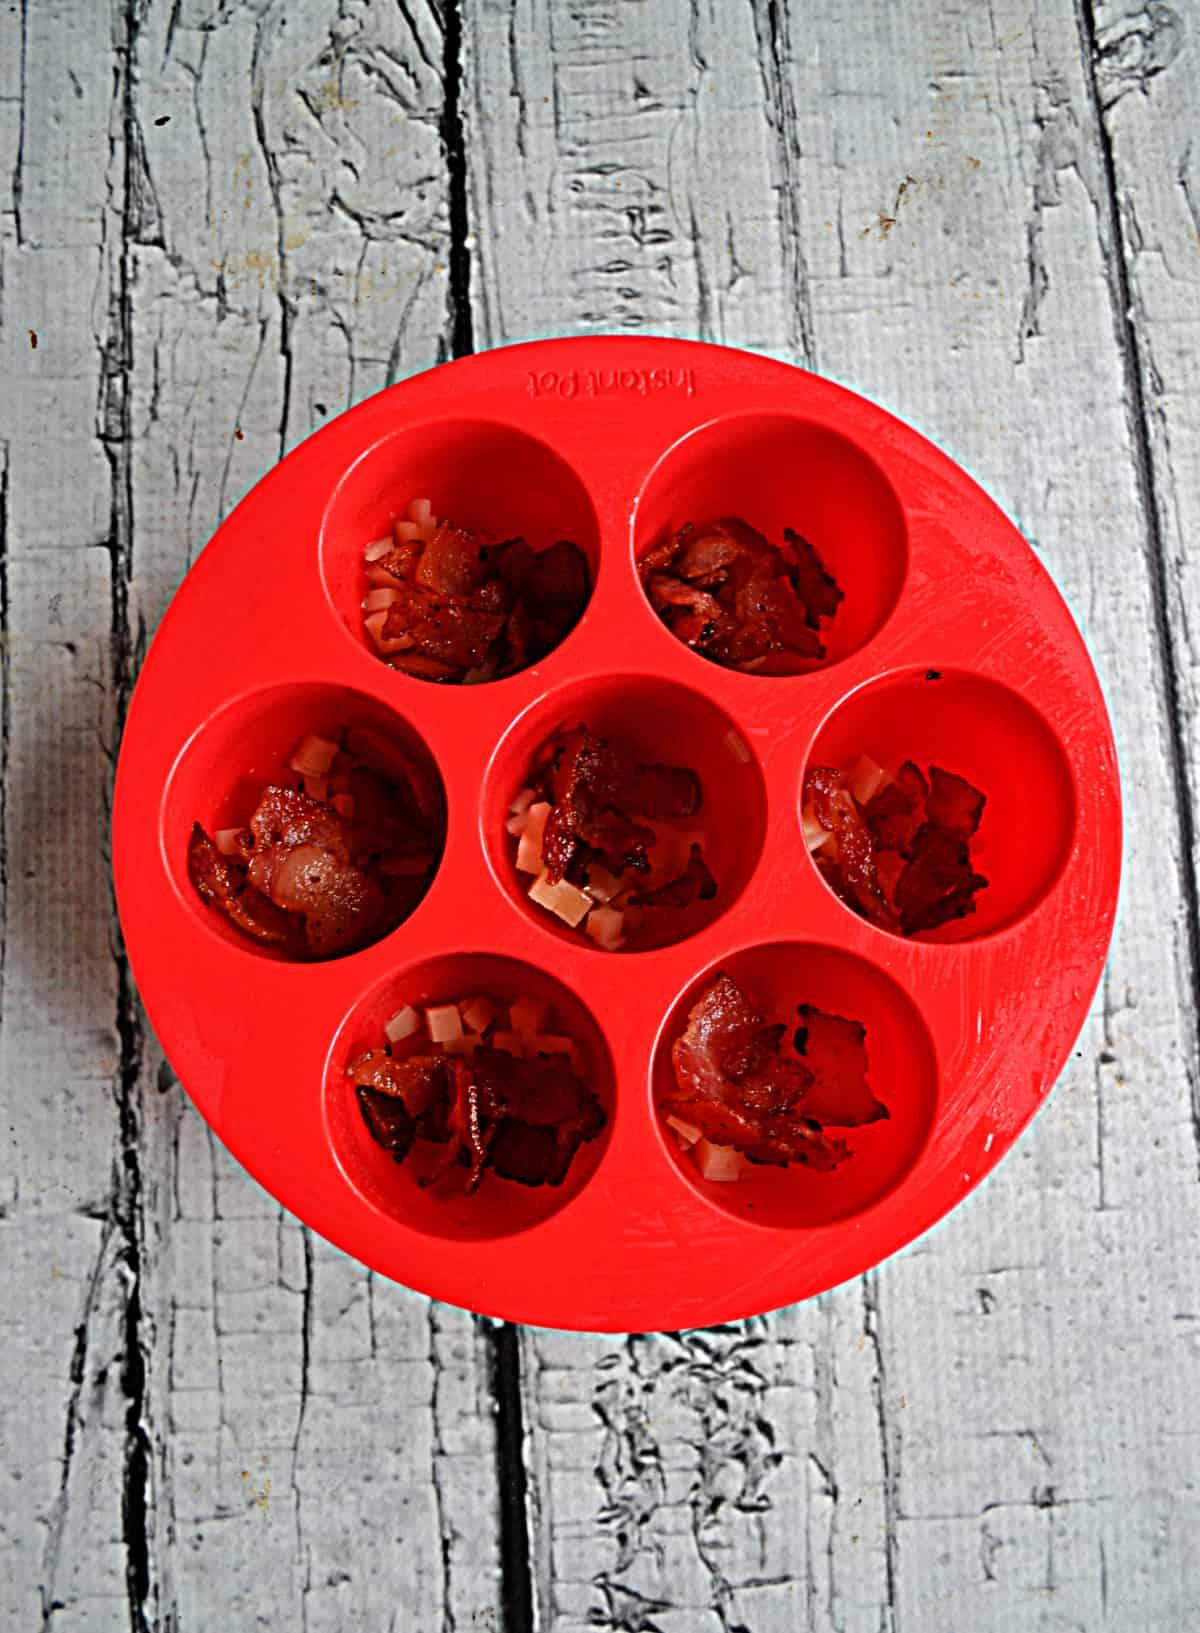 Silicone egg bite mold with bacon in the cups.